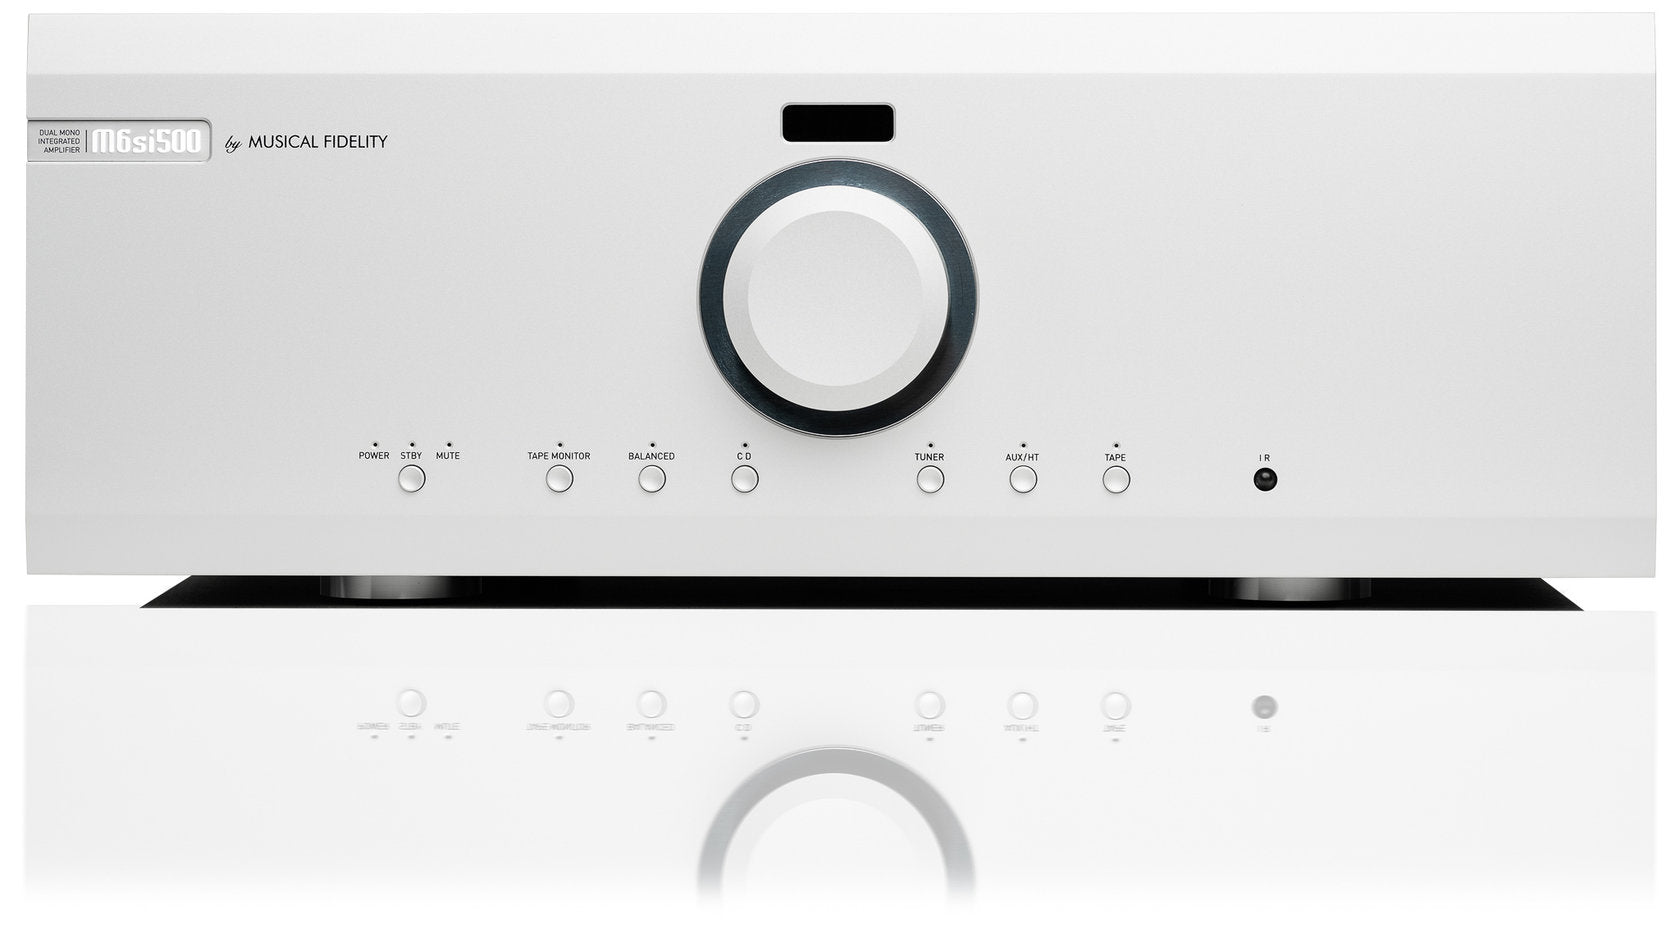 Musical Fidelity M6si500 amplifier